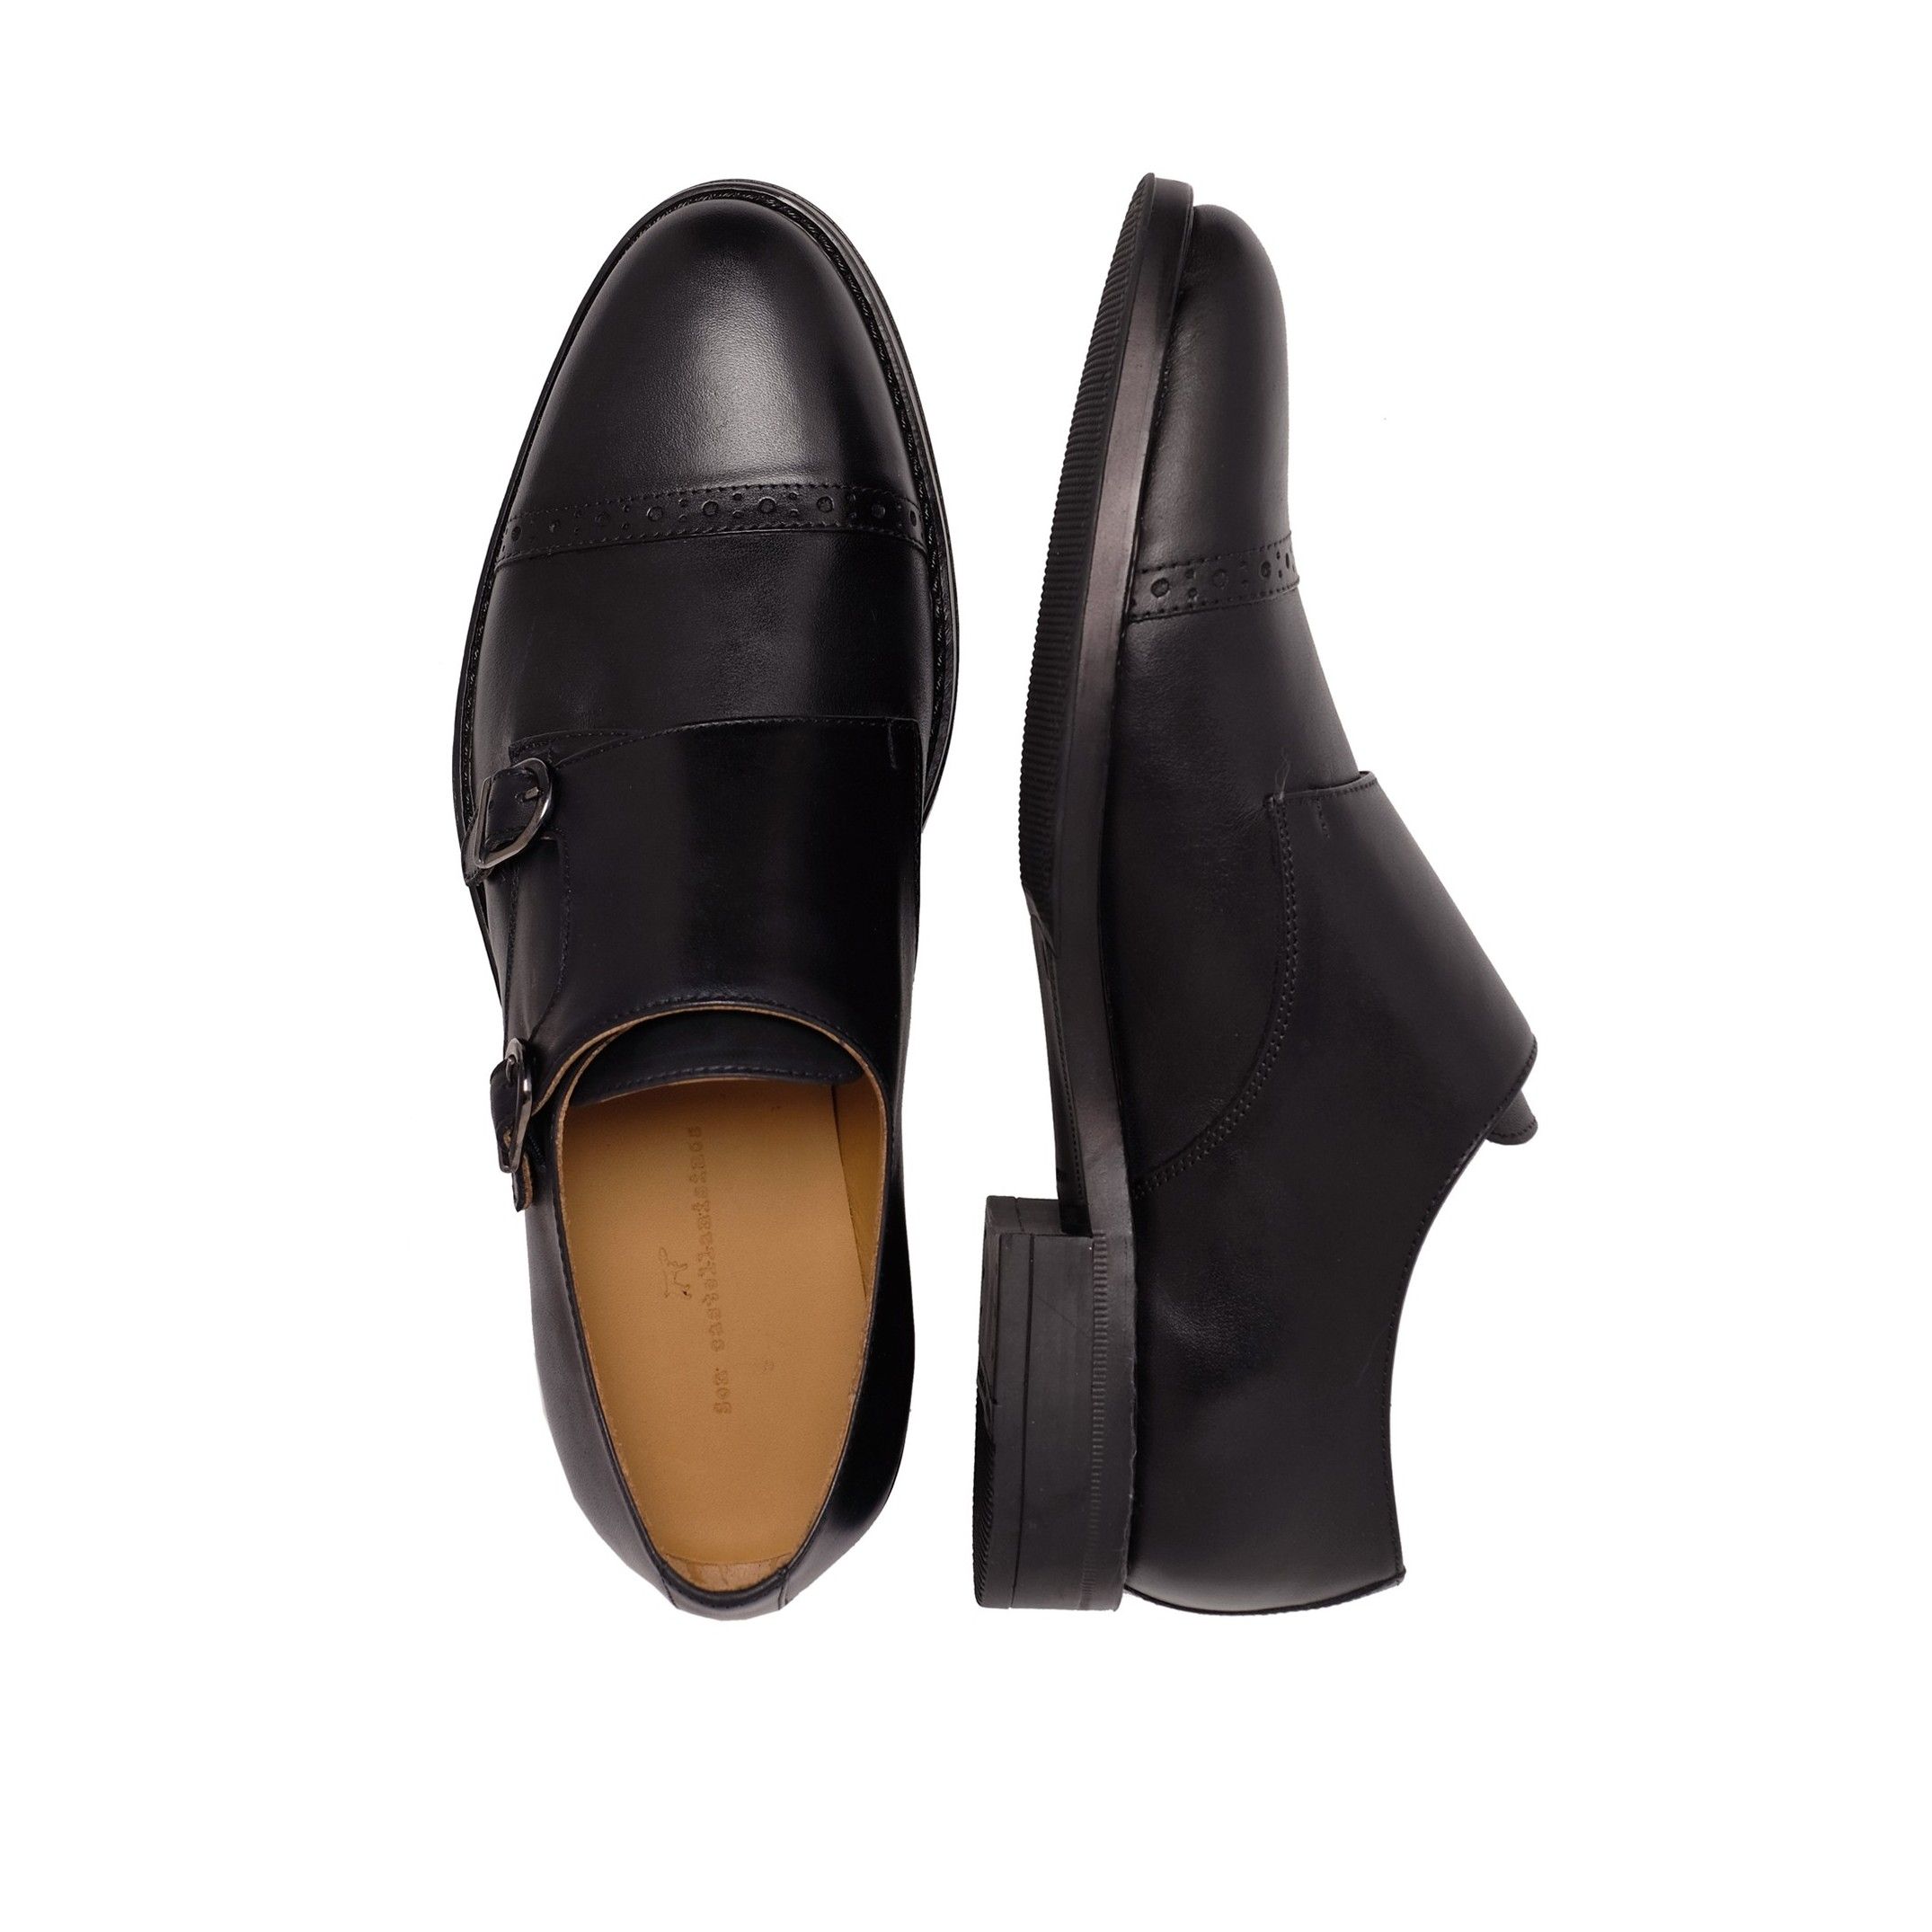 Monkstrap shoes in florentic leather. Closure: metalic buckle. Upper: florentic leather. Inner and insole: leather. Sole: Synthetic leather (better in durability and waterproofness). MADE IN SPAIN.